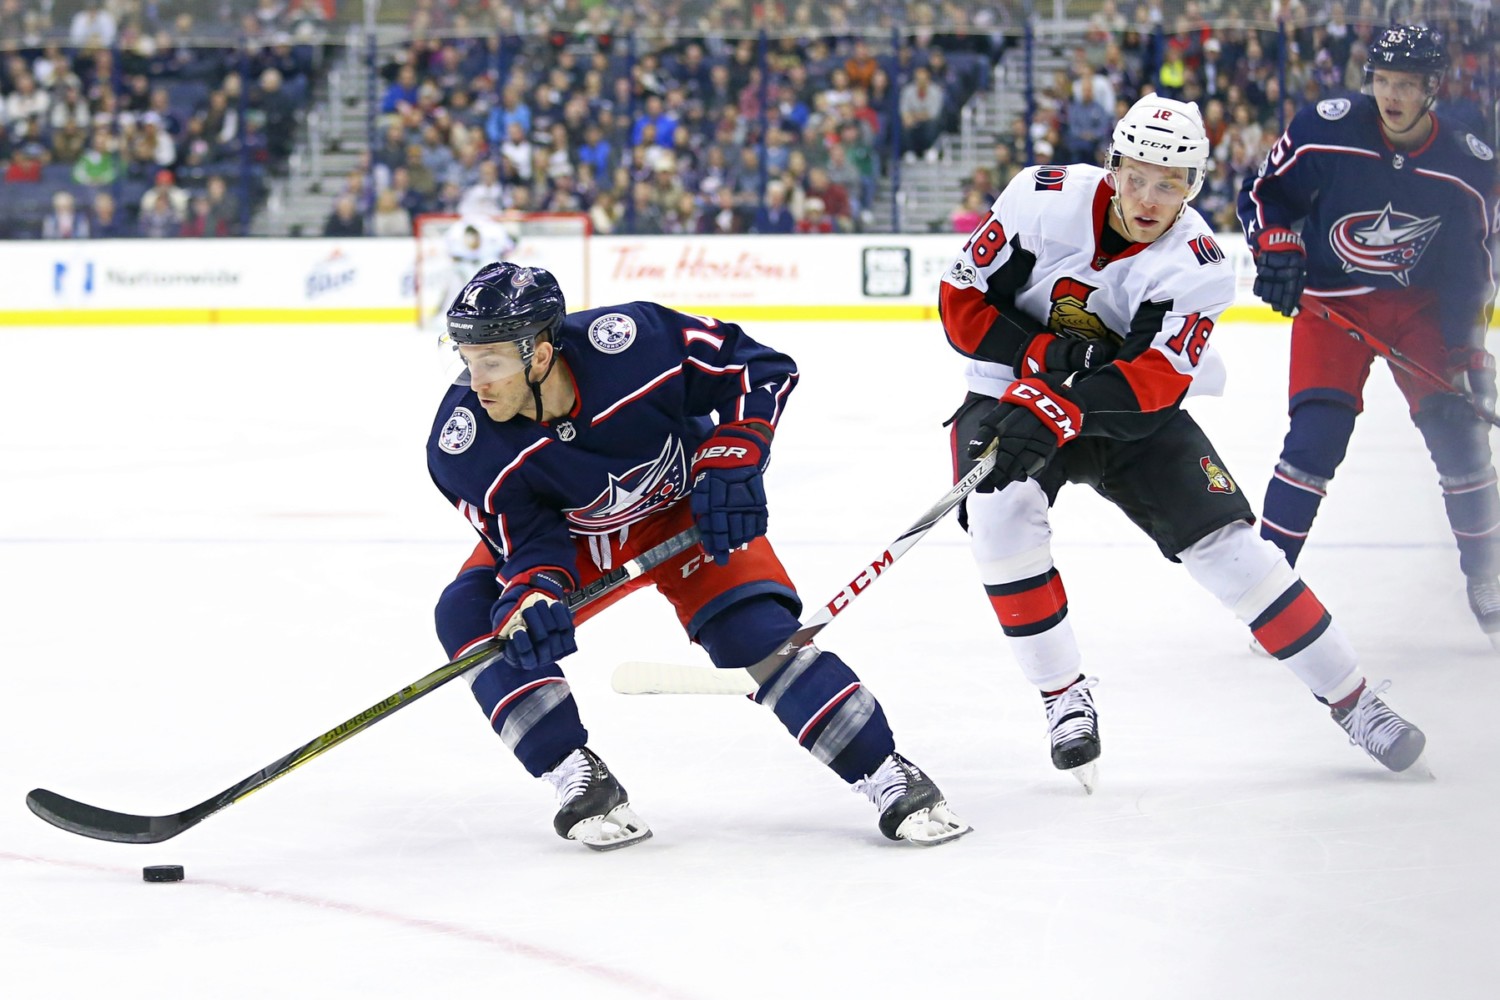 The Ottawa Senators have traded forward Ryan Dzingel and a 2019 7th draft pick (Calgary's) to the Columbus Blue Jackets for a 2020 2nd round pick, a 2021 2nd round pick and Anthony Duclair.